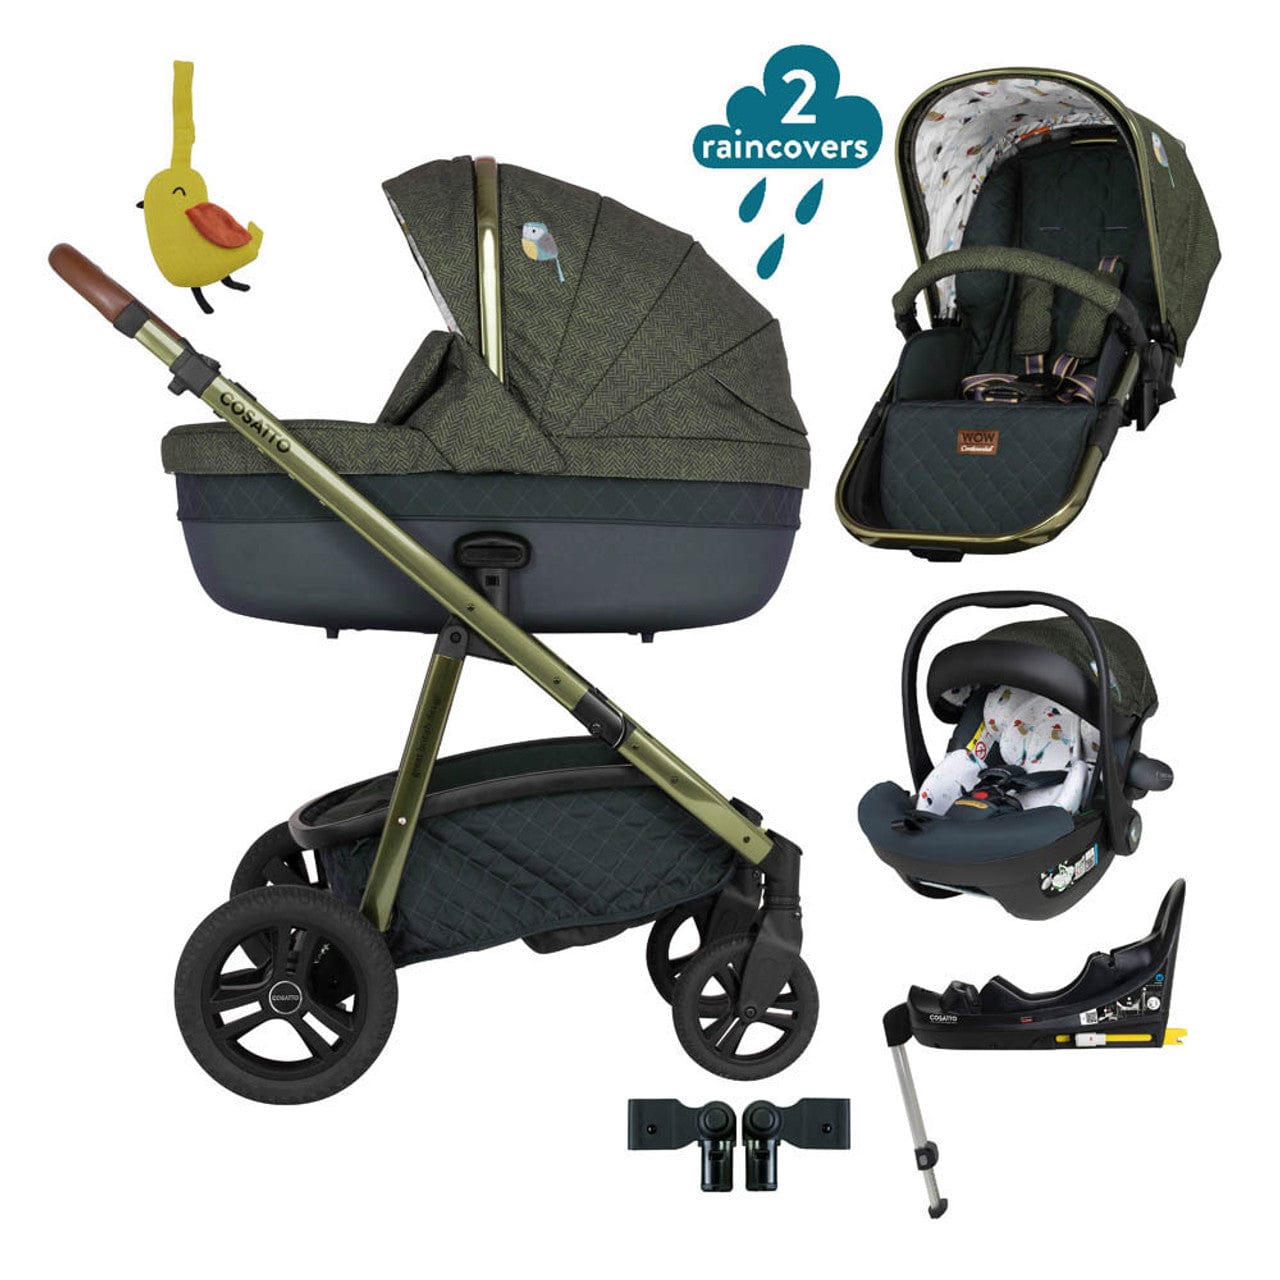 cosatto Prams & Car Seat Bundles Bureau Cosatto Wow Continental Car Seat And i-Size Base Bundle - Direct Delivery